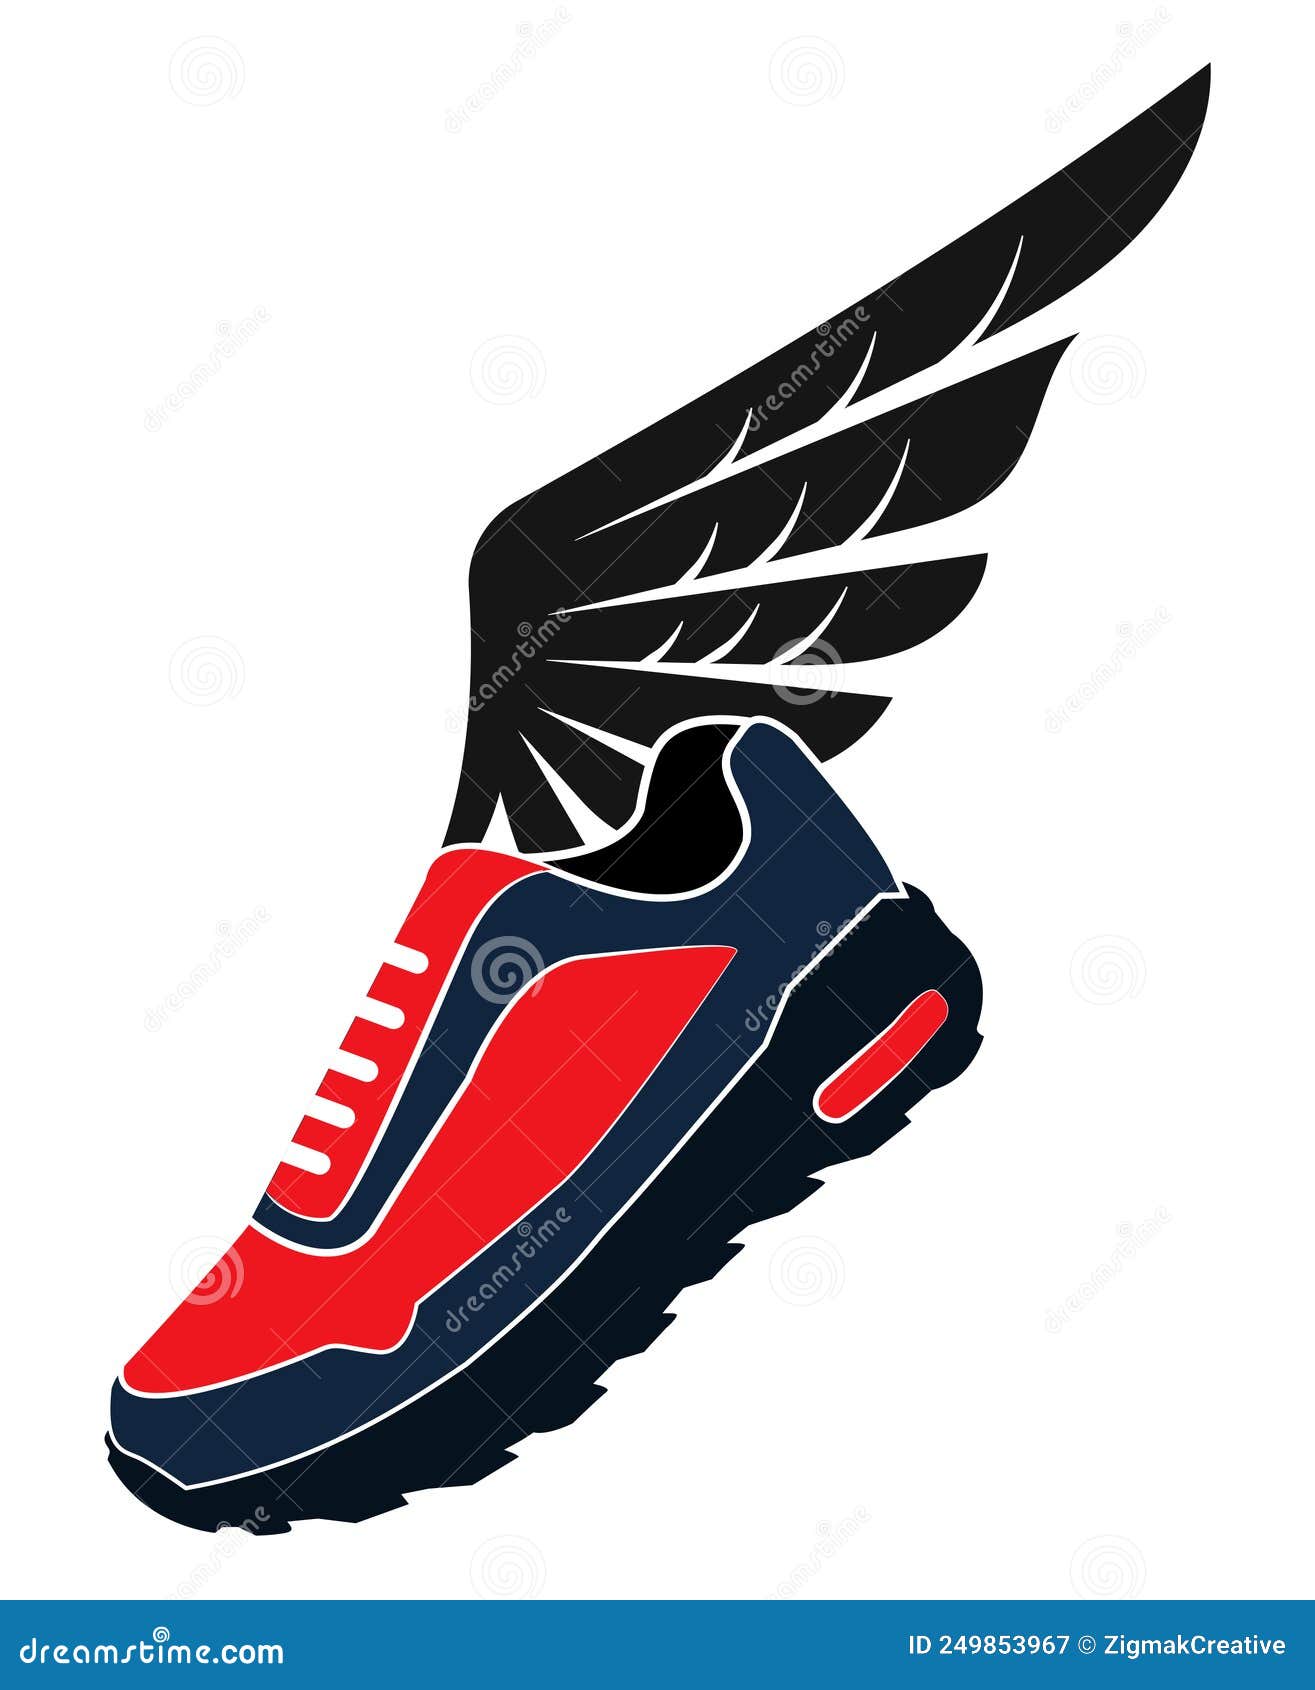 Shoes with wings Royalty Free Vector Image - VectorStock